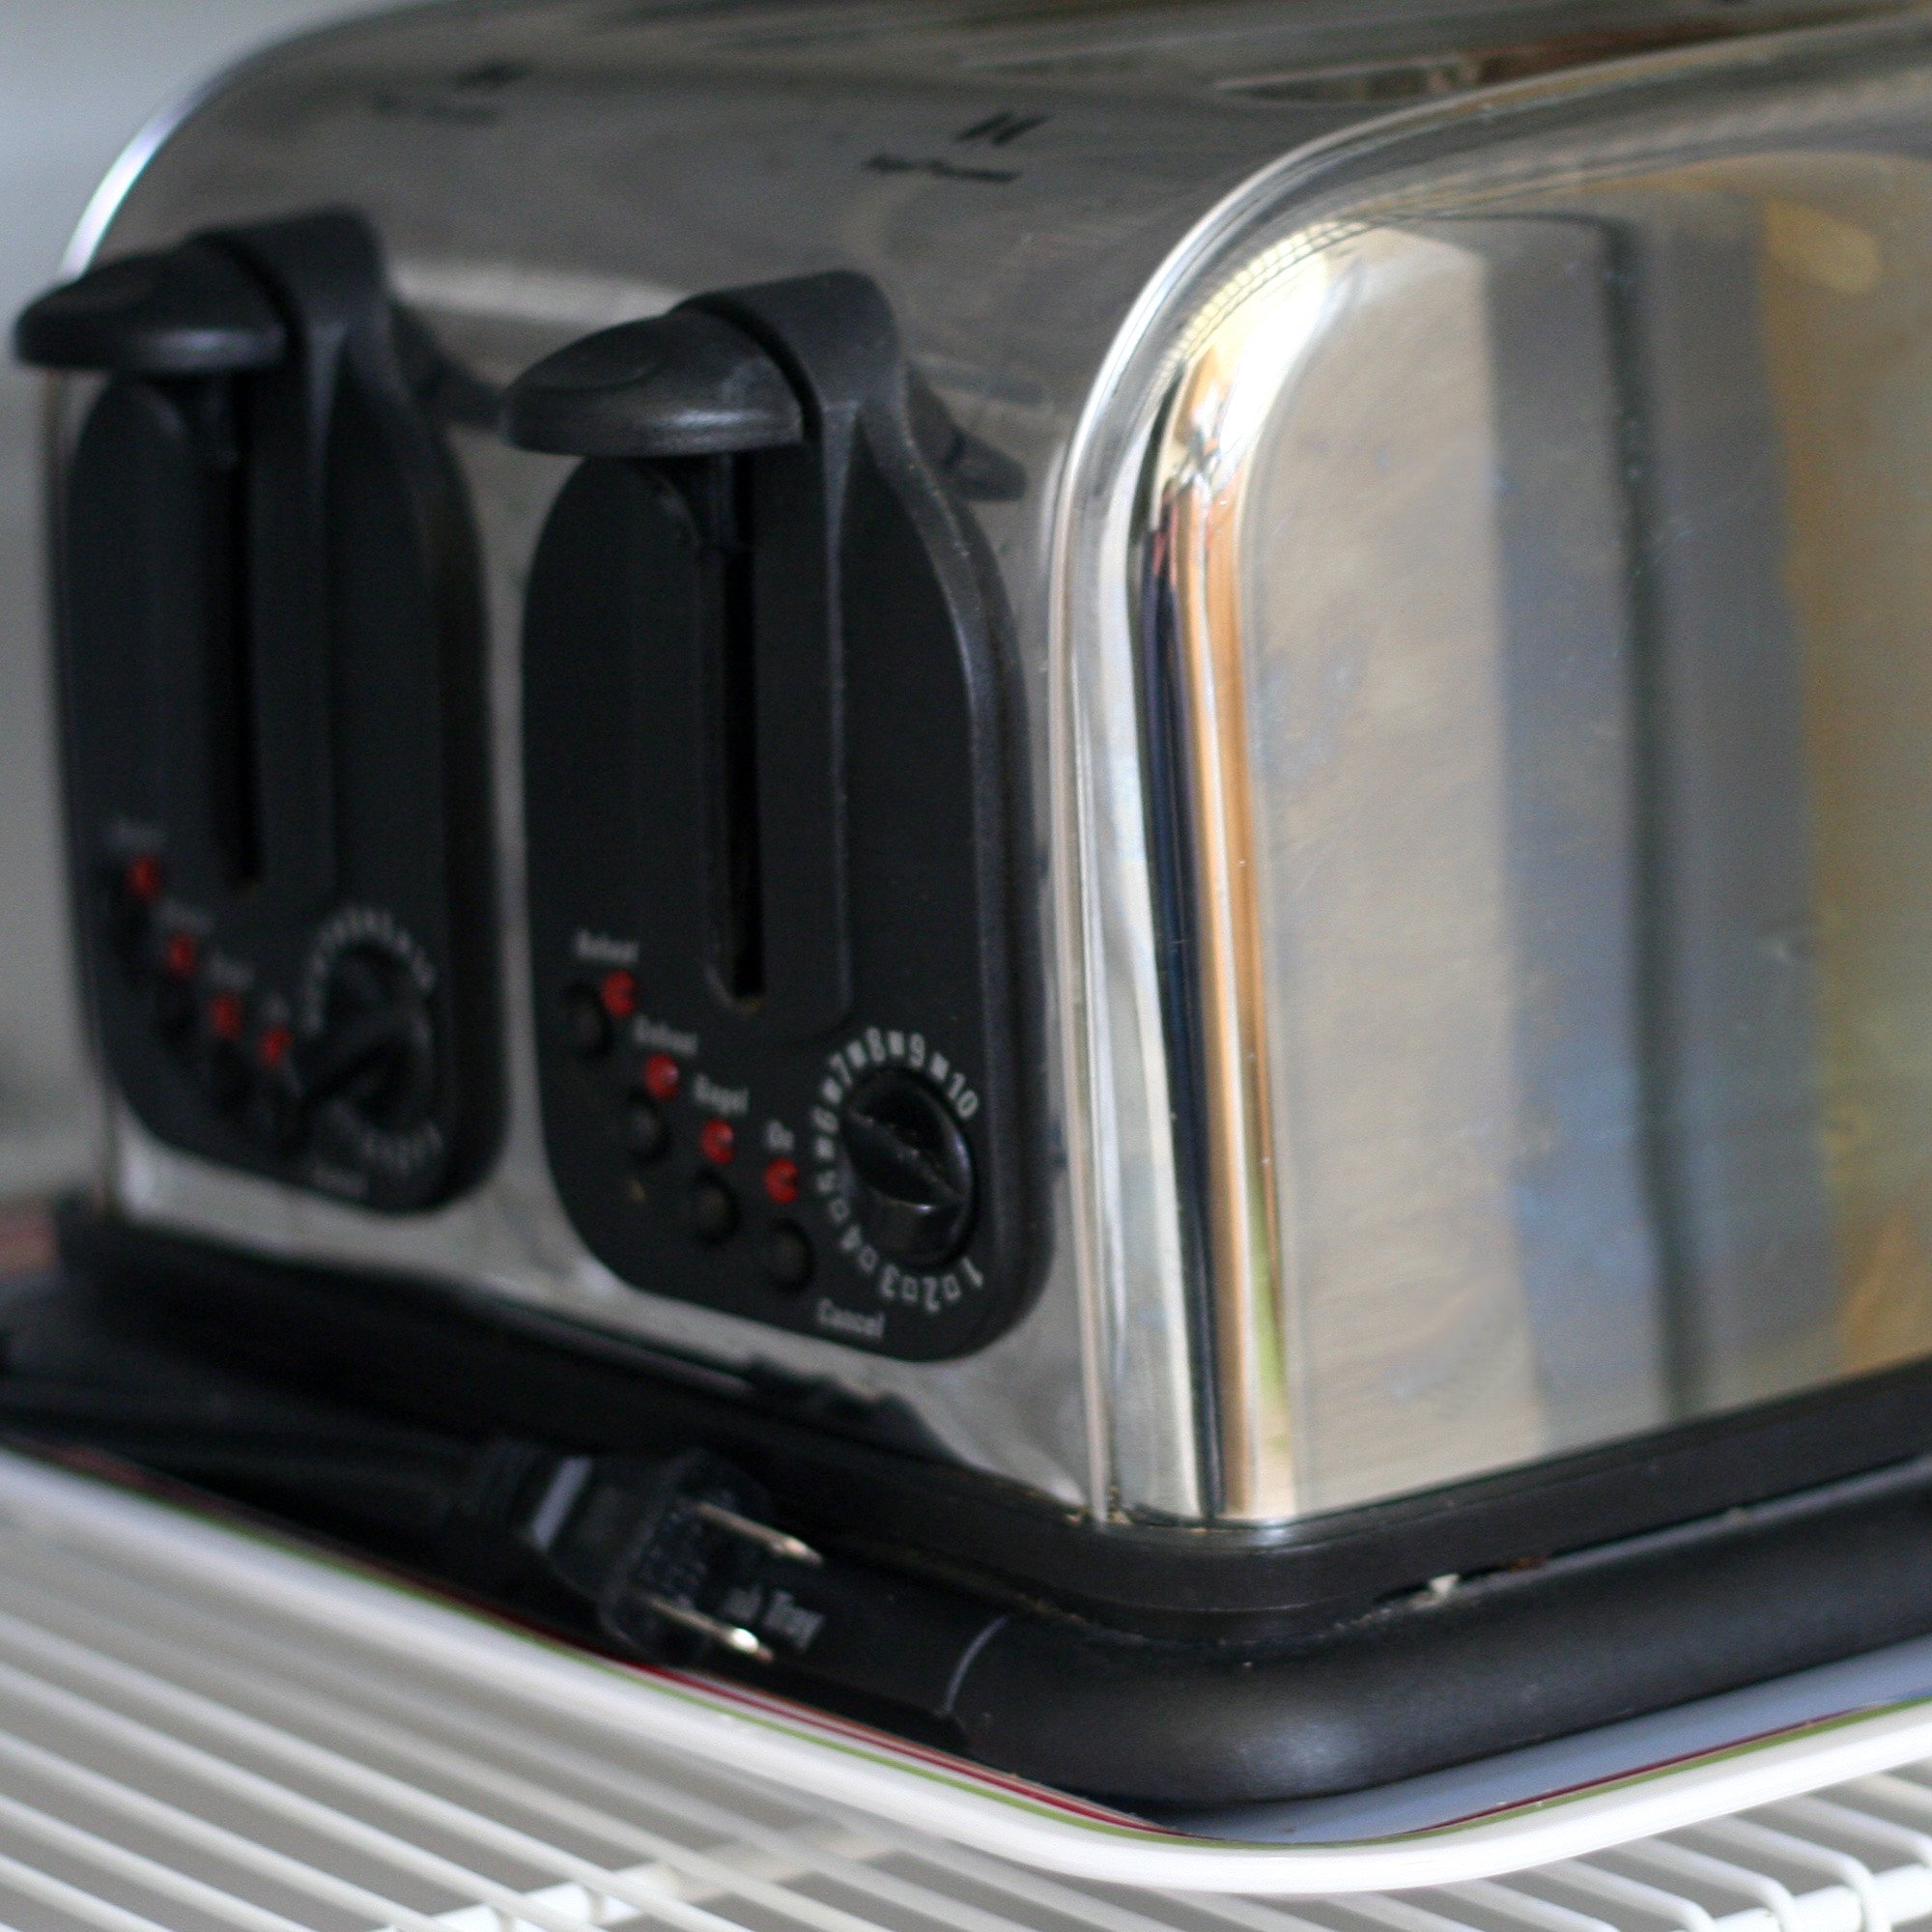 Trays are a great solution for storing and transporting your toaster around the kitchen